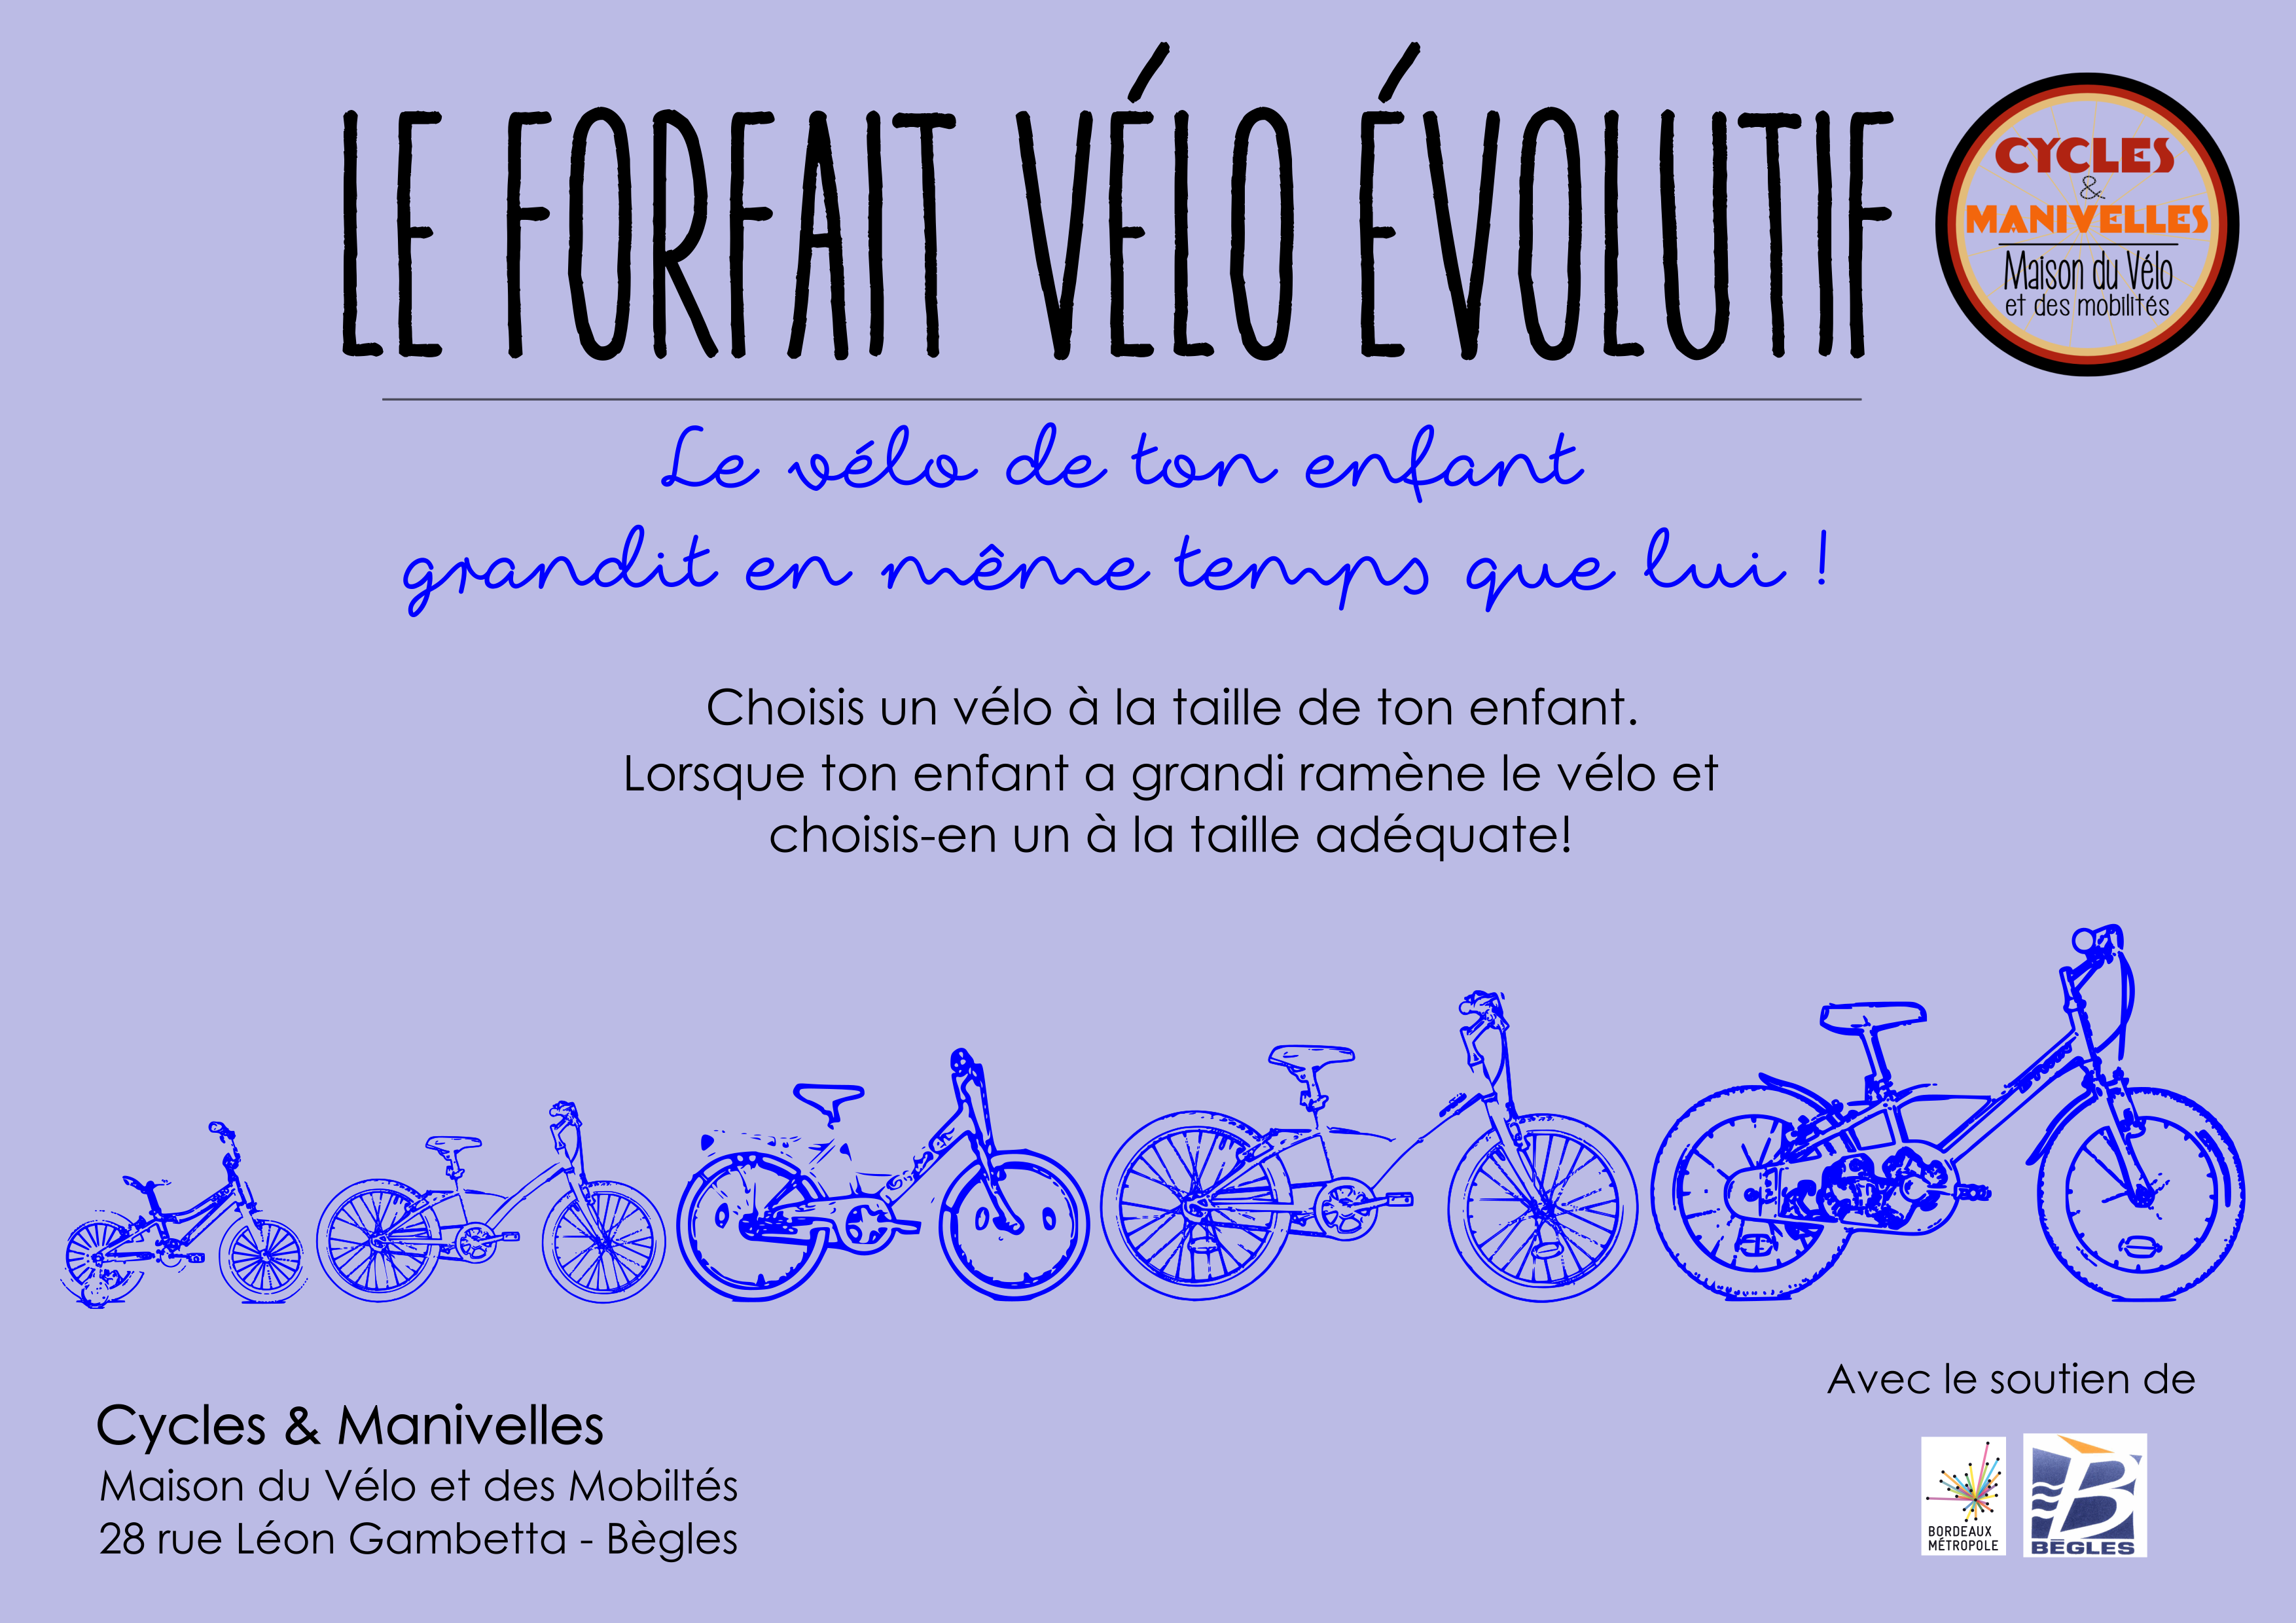 https://www.cycles-manivelles.org/wp-content/uploads/2017/11/forfaitveloevolutif.png